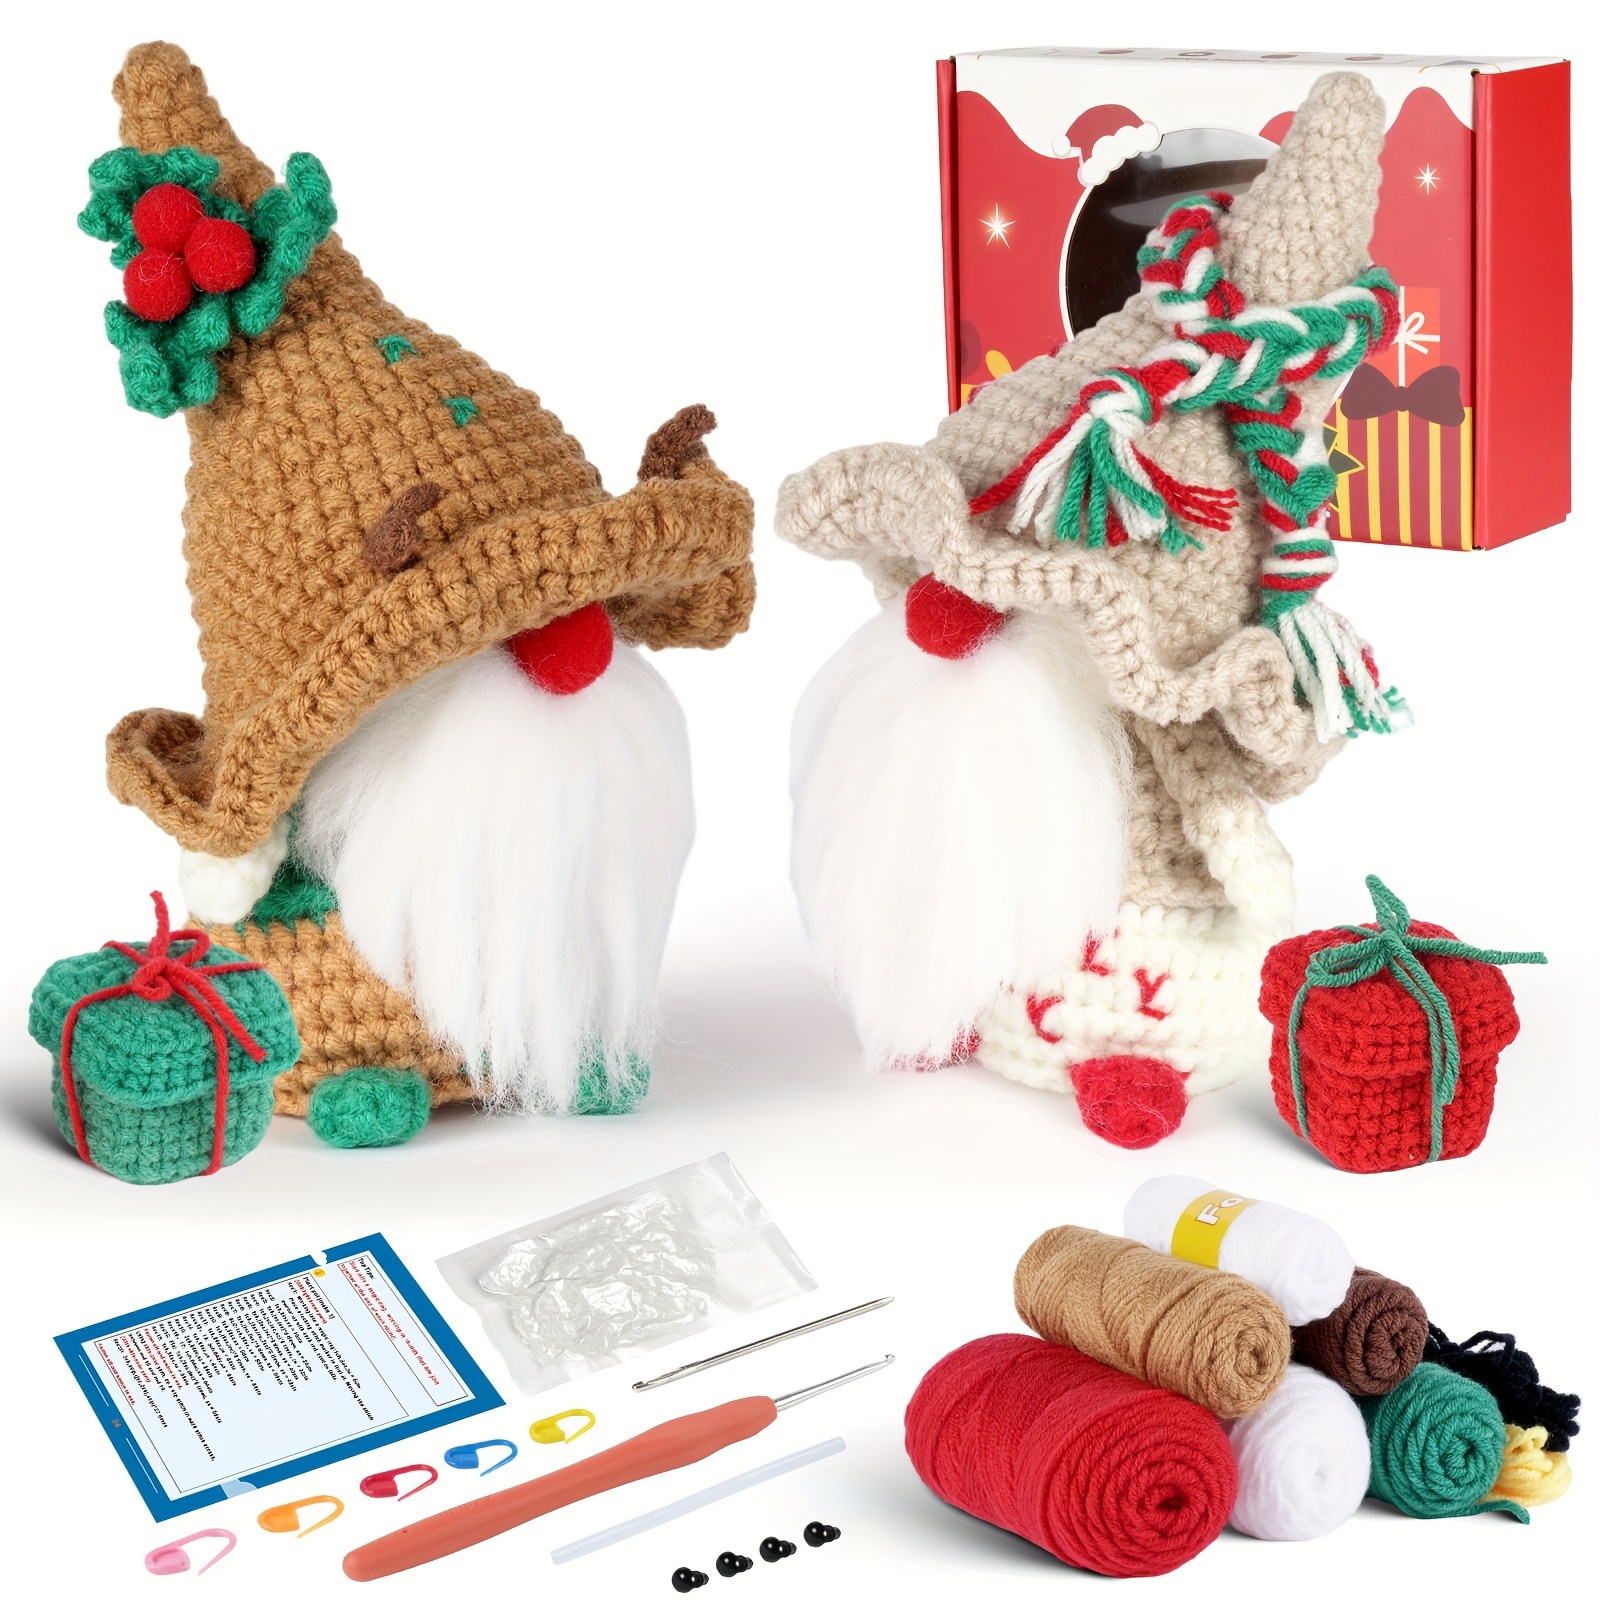 Christmas Gnome with Balls Crochet Kit for Beginners, Beginner Crochet Kit  for Adults with Step-by-Step Video Tutorials, Create Your Own Festive